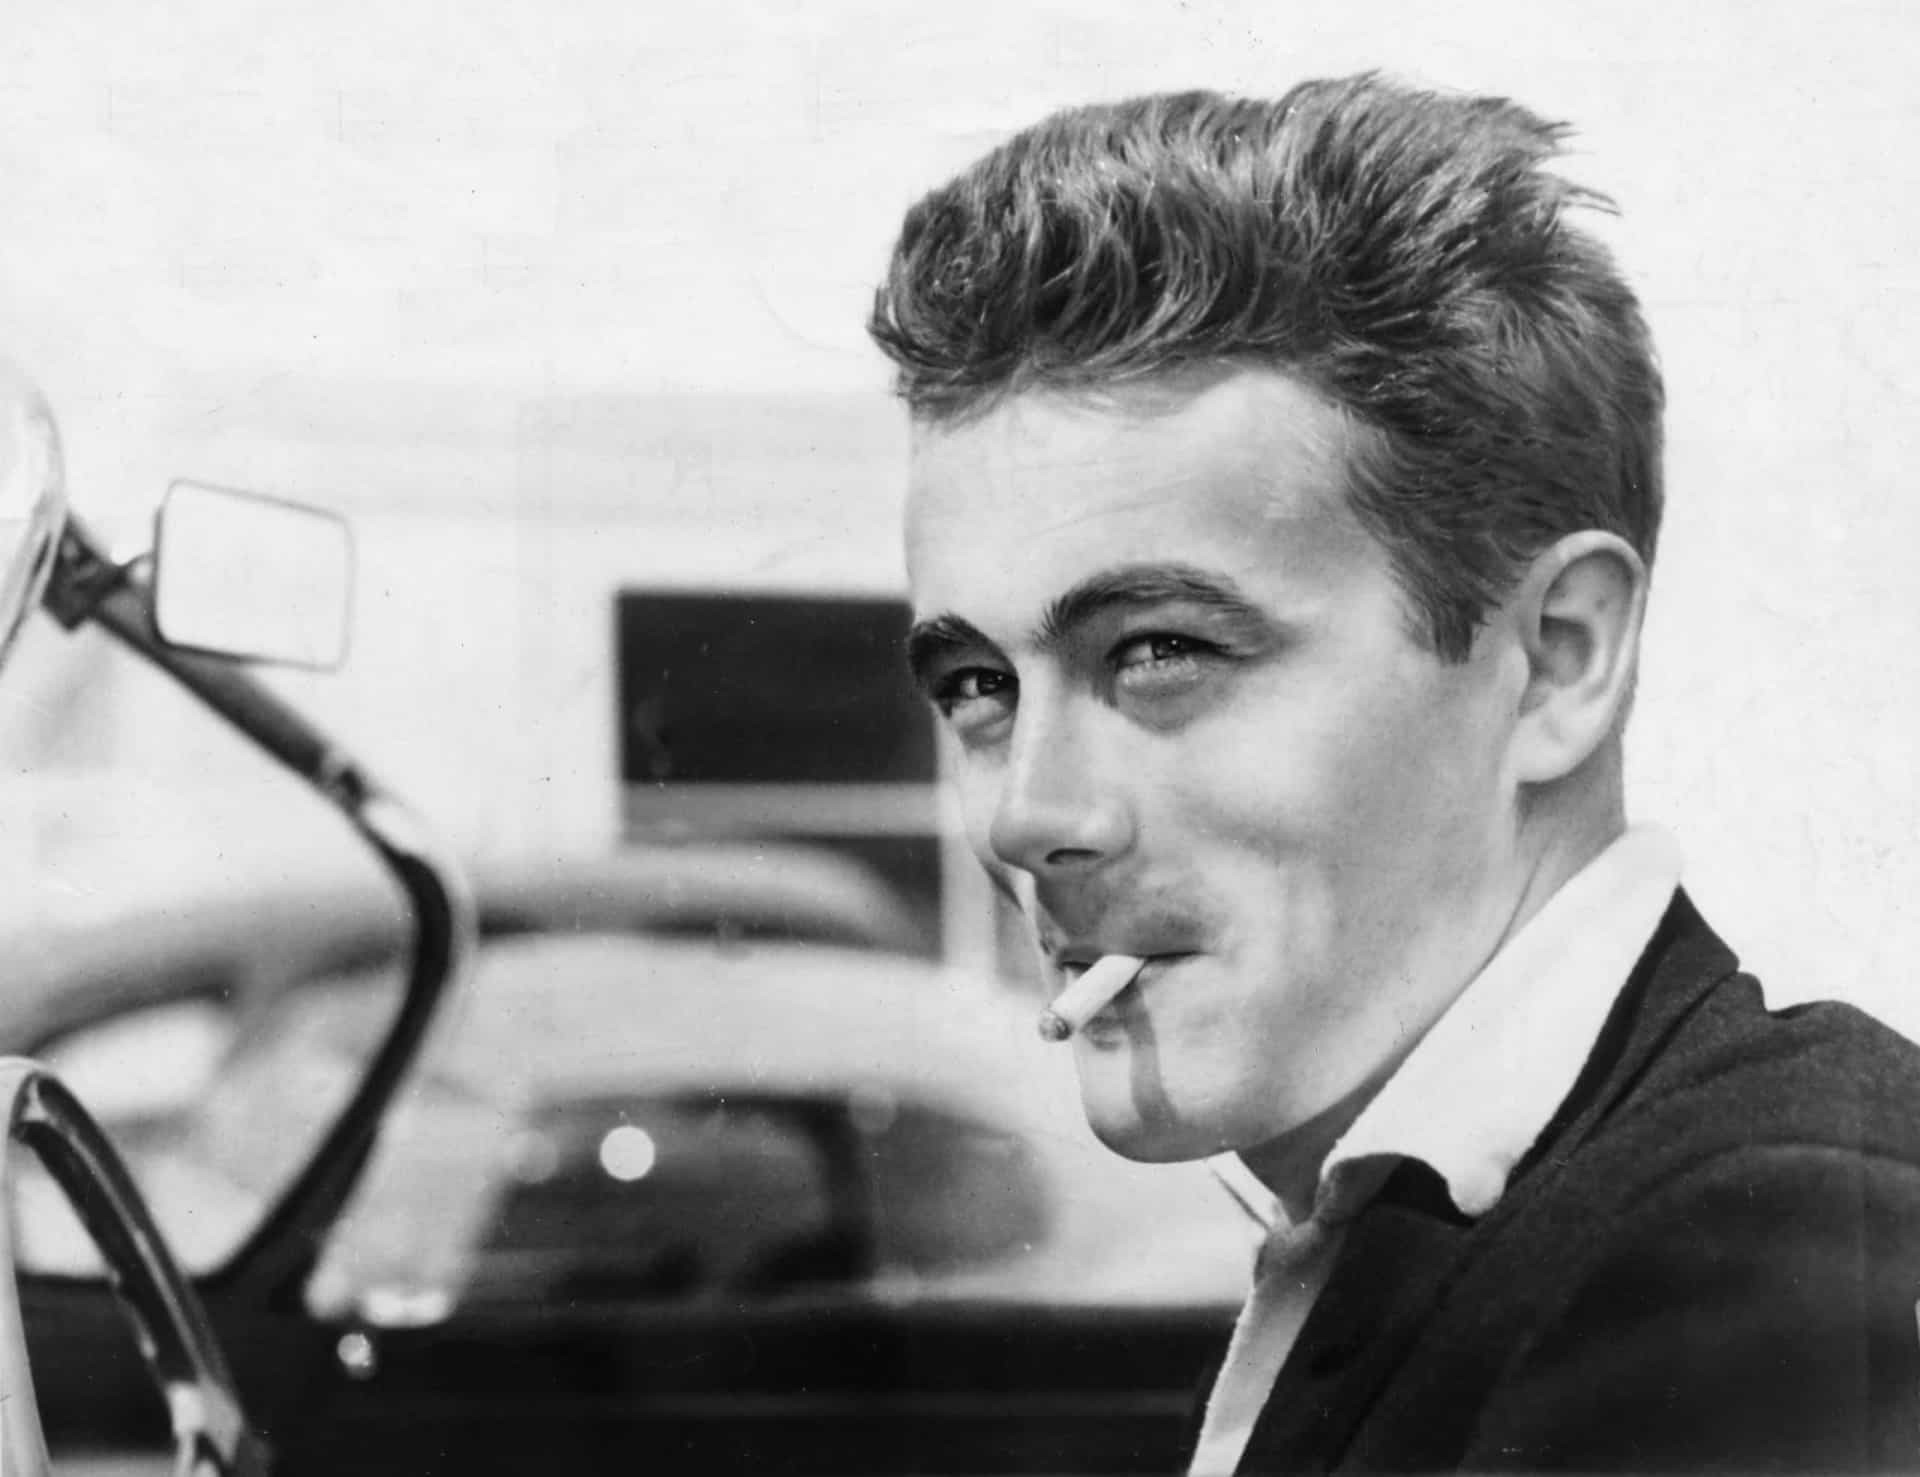 The short and tragic life of James Dean